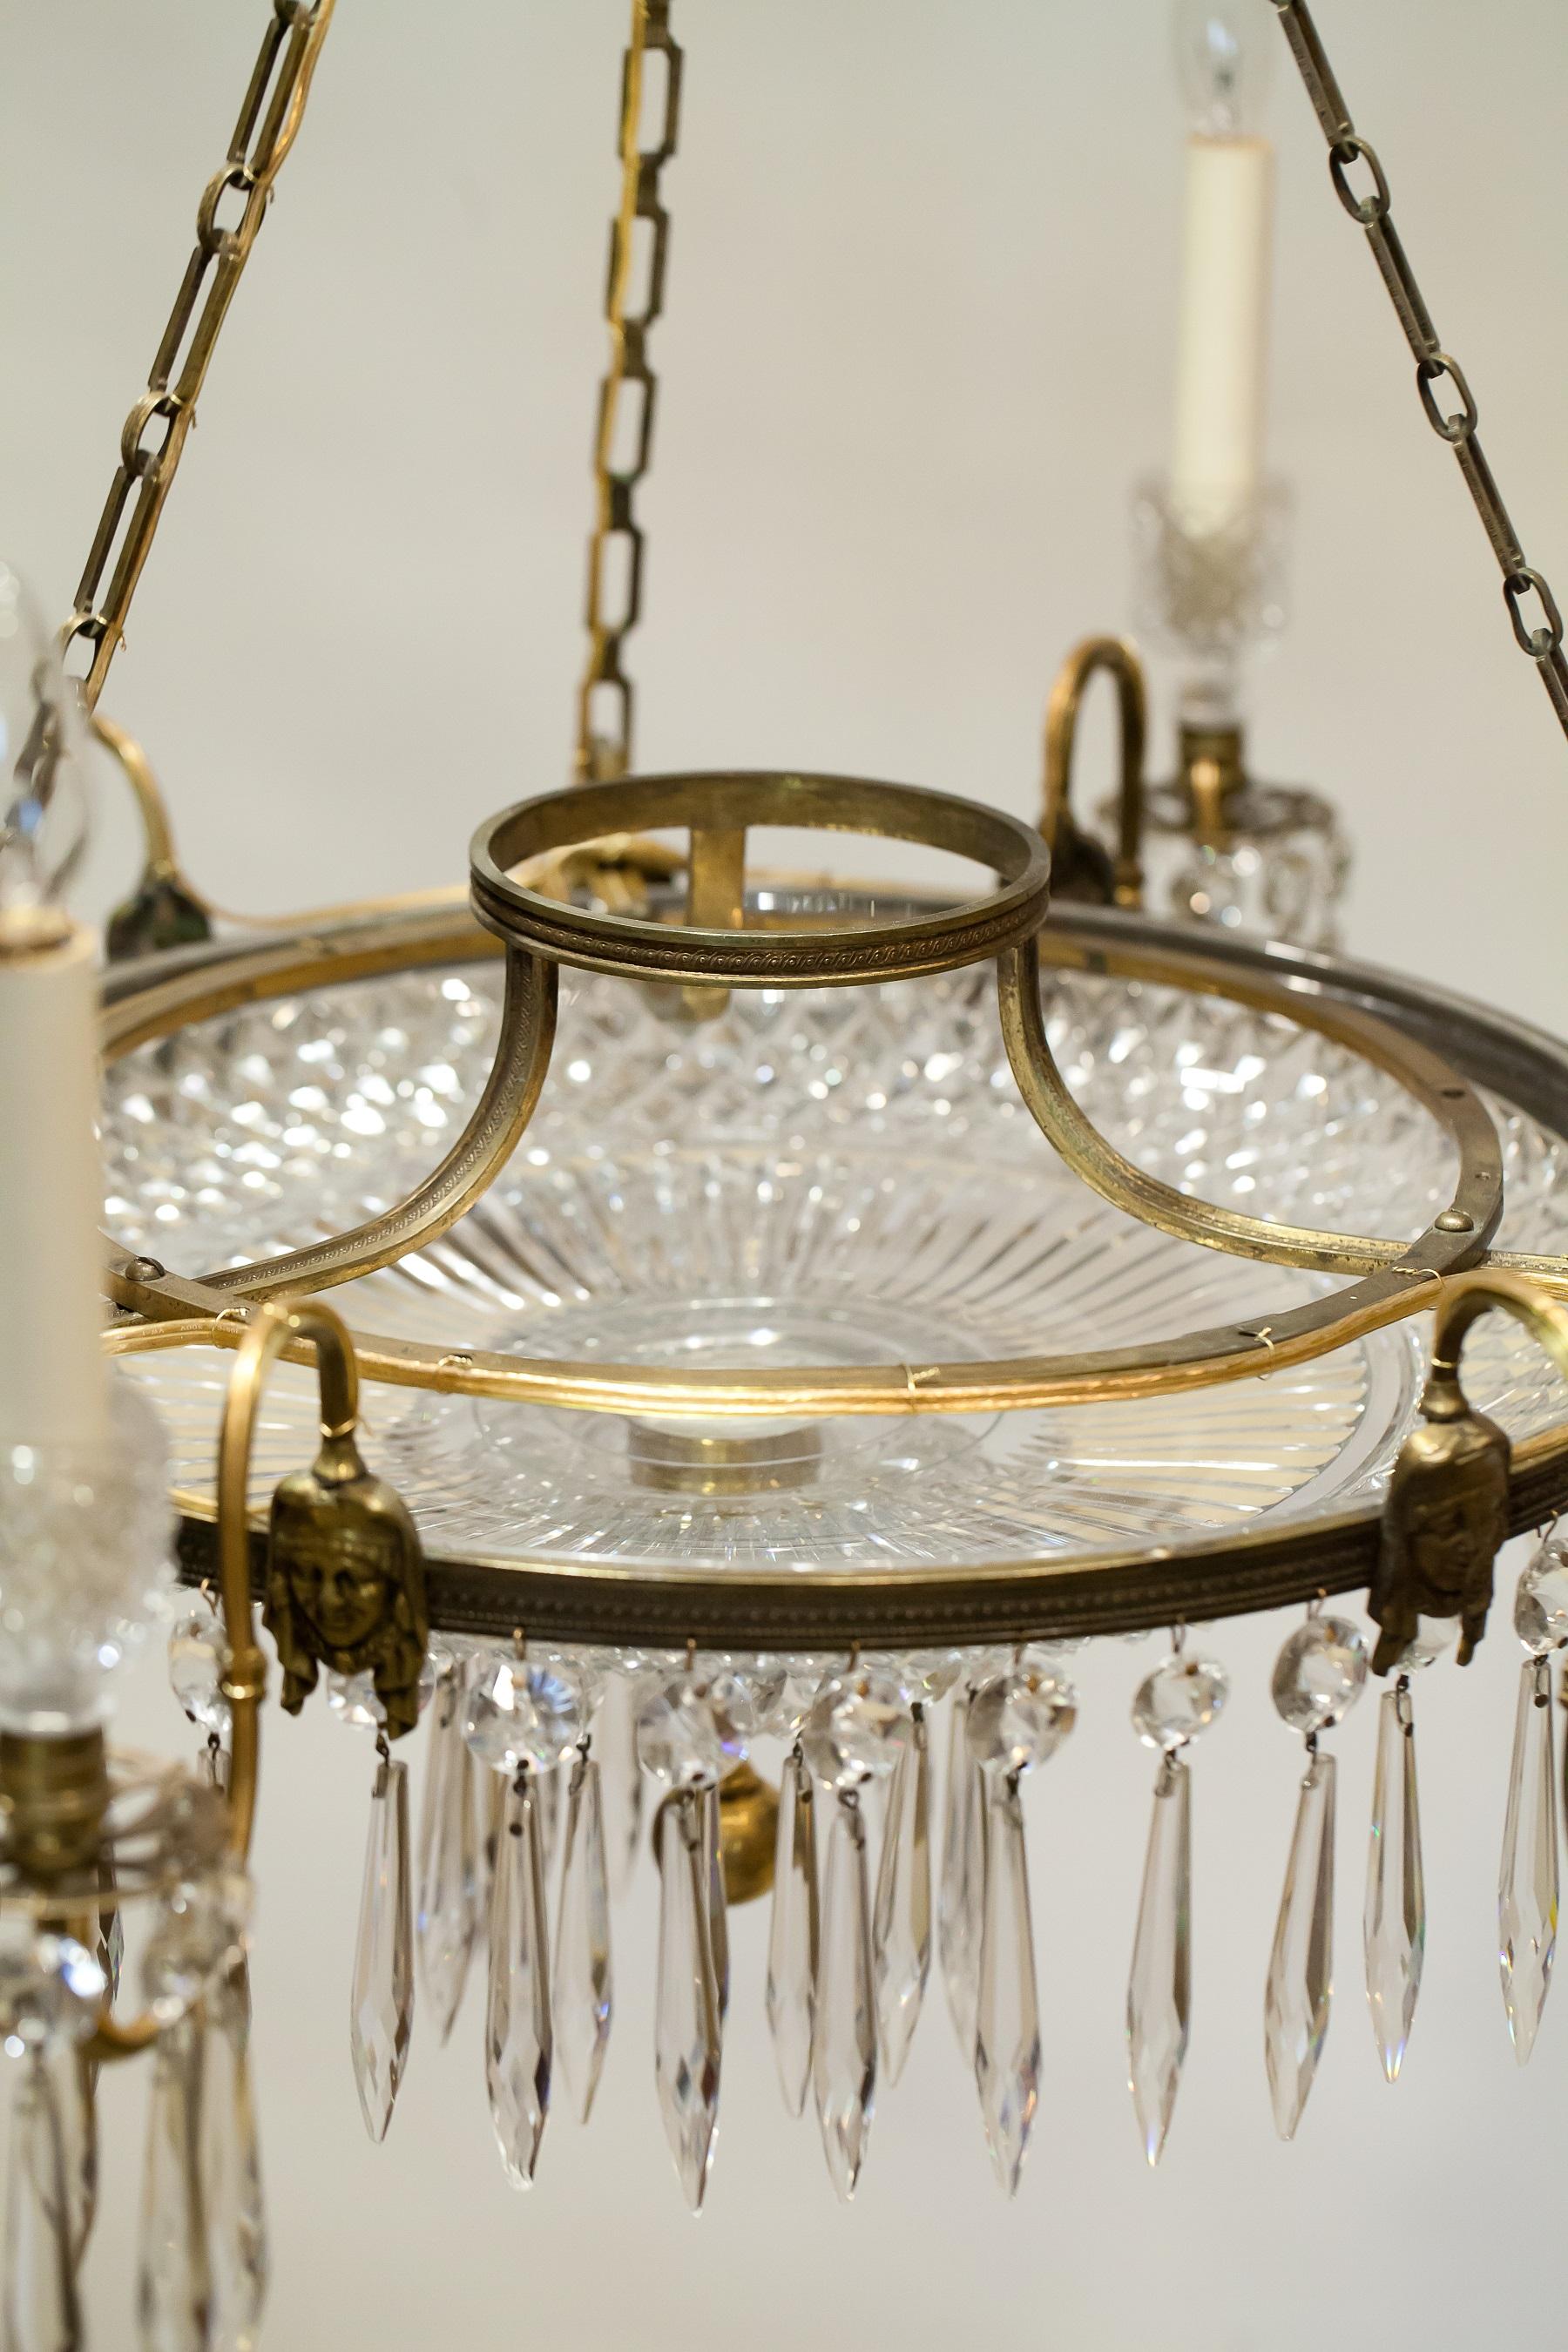 19th Century Regency Six-Light Brass and Cut-Crystal Chandelier, Circa:1810, London For Sale